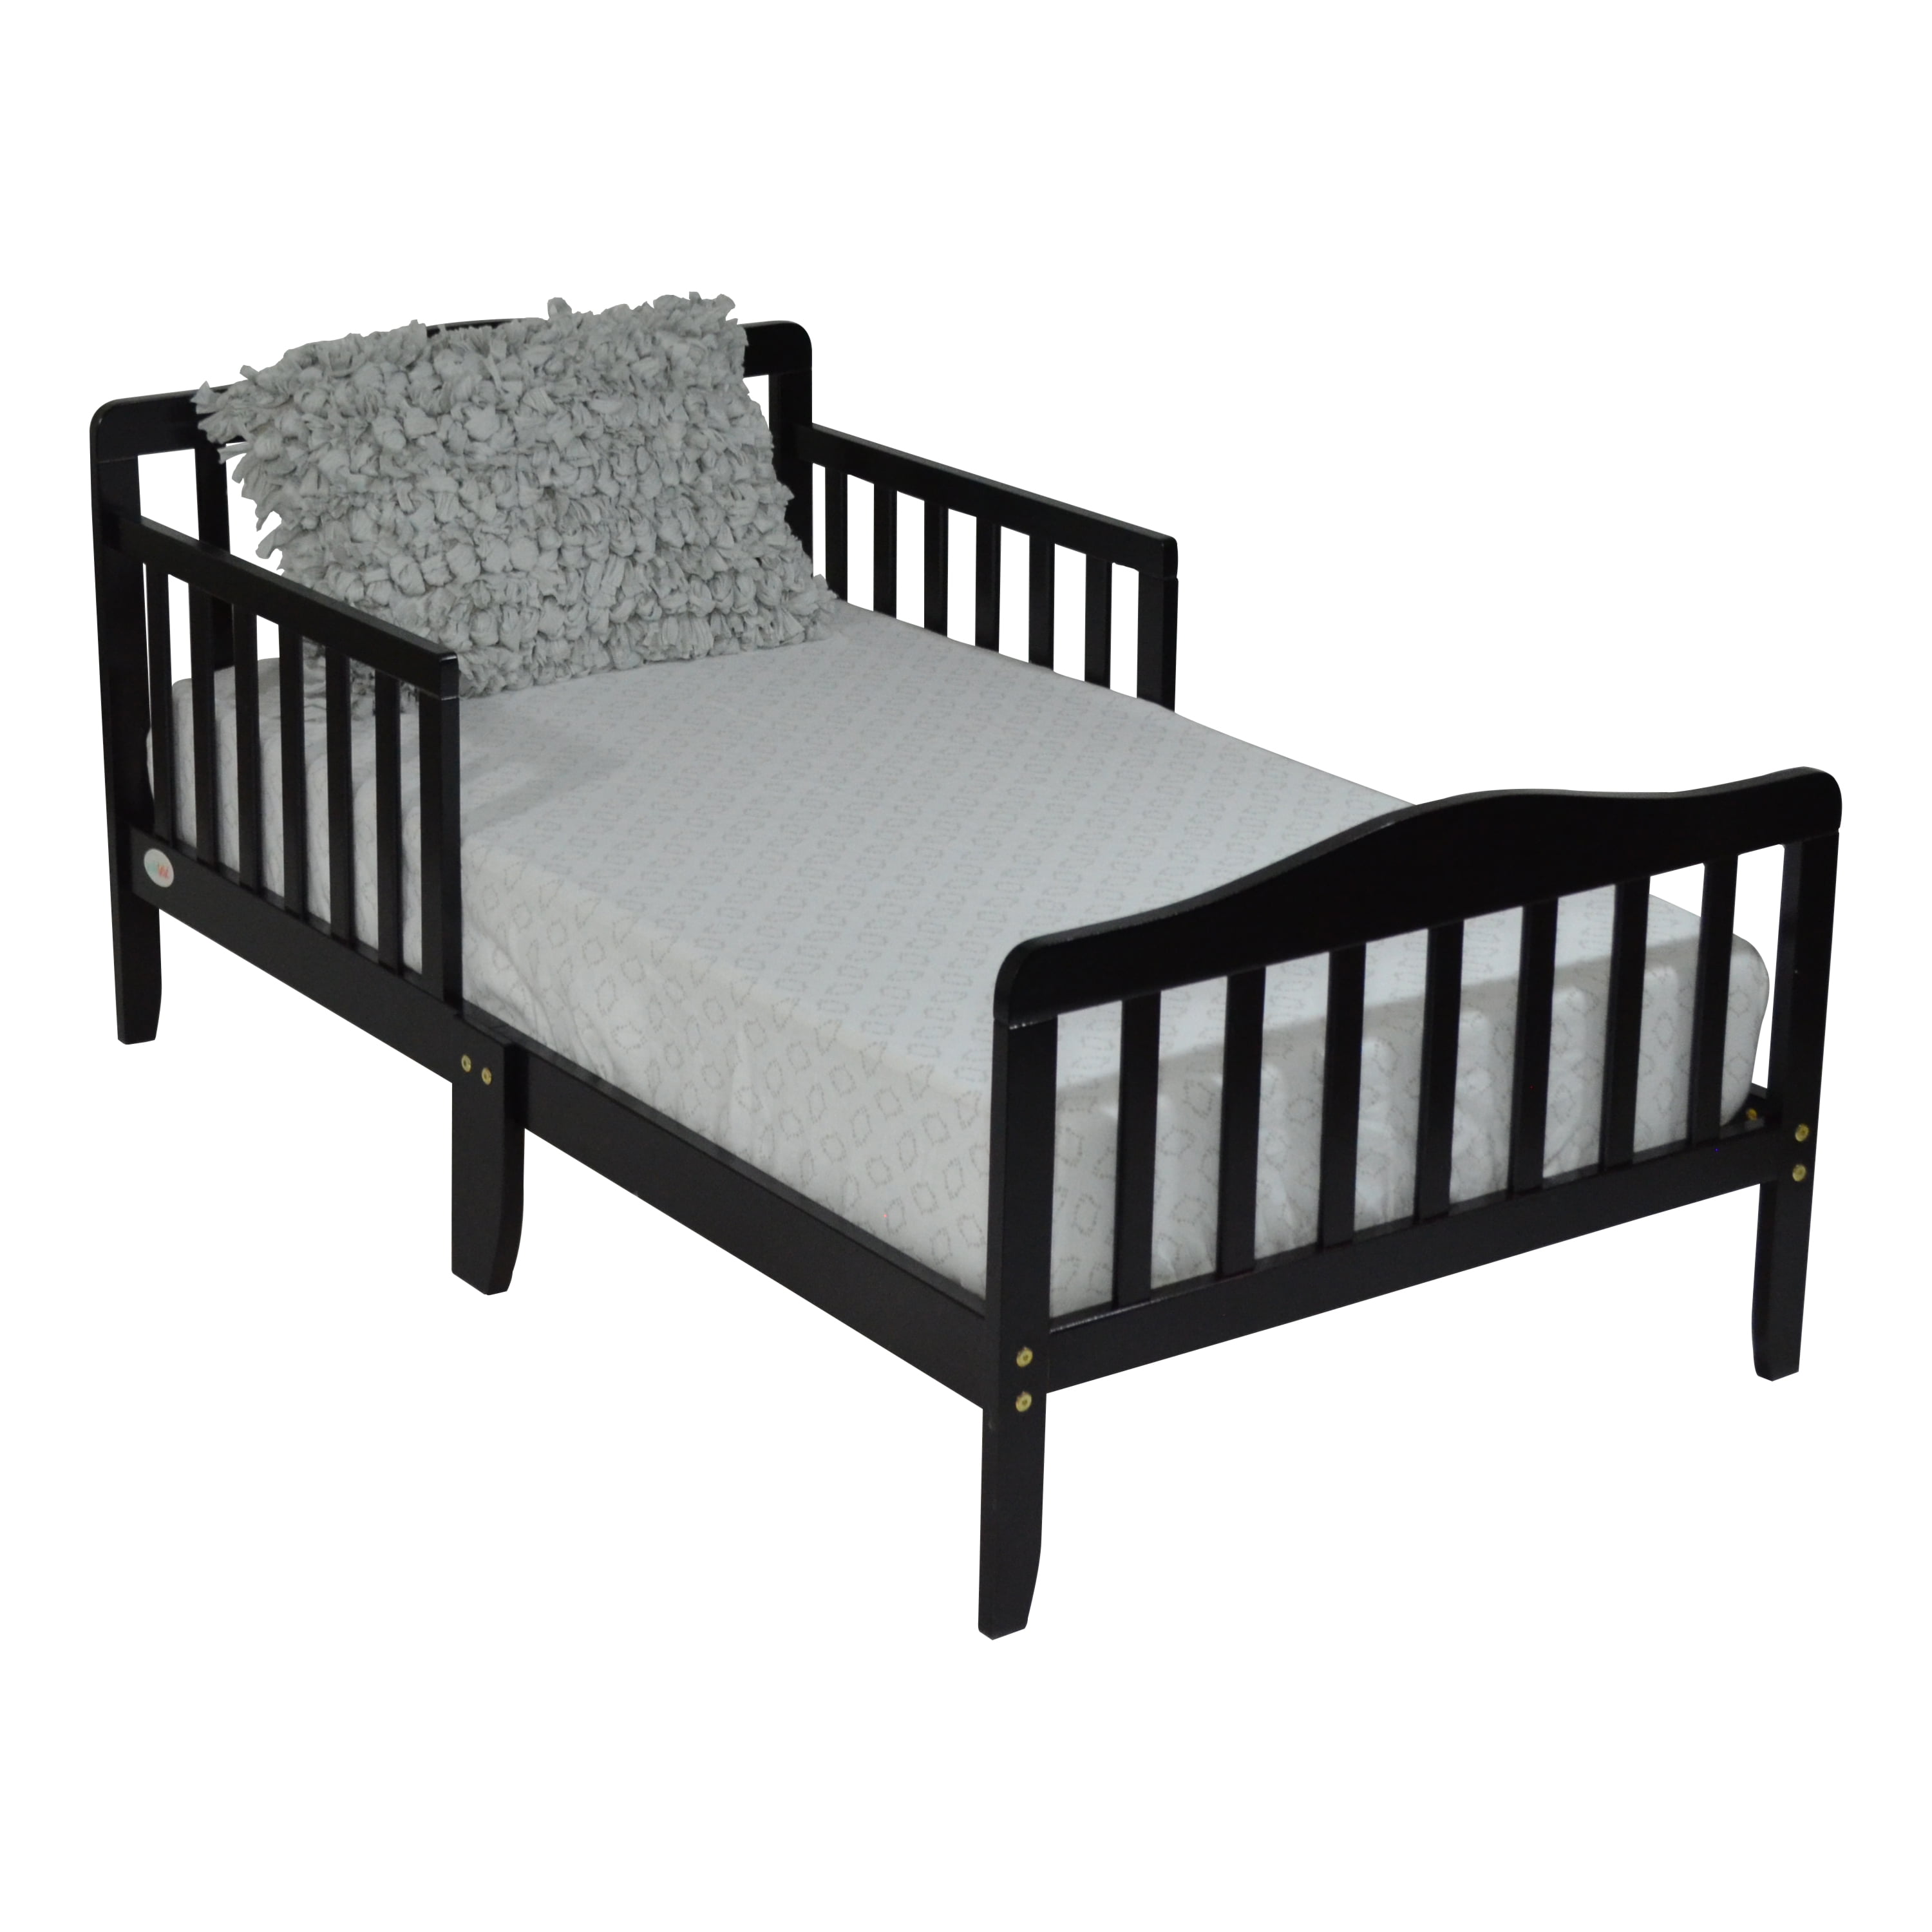 texture ideology Facilitate Suite Bebe Blaire Toddler Bed in Espresso - Walmart.com